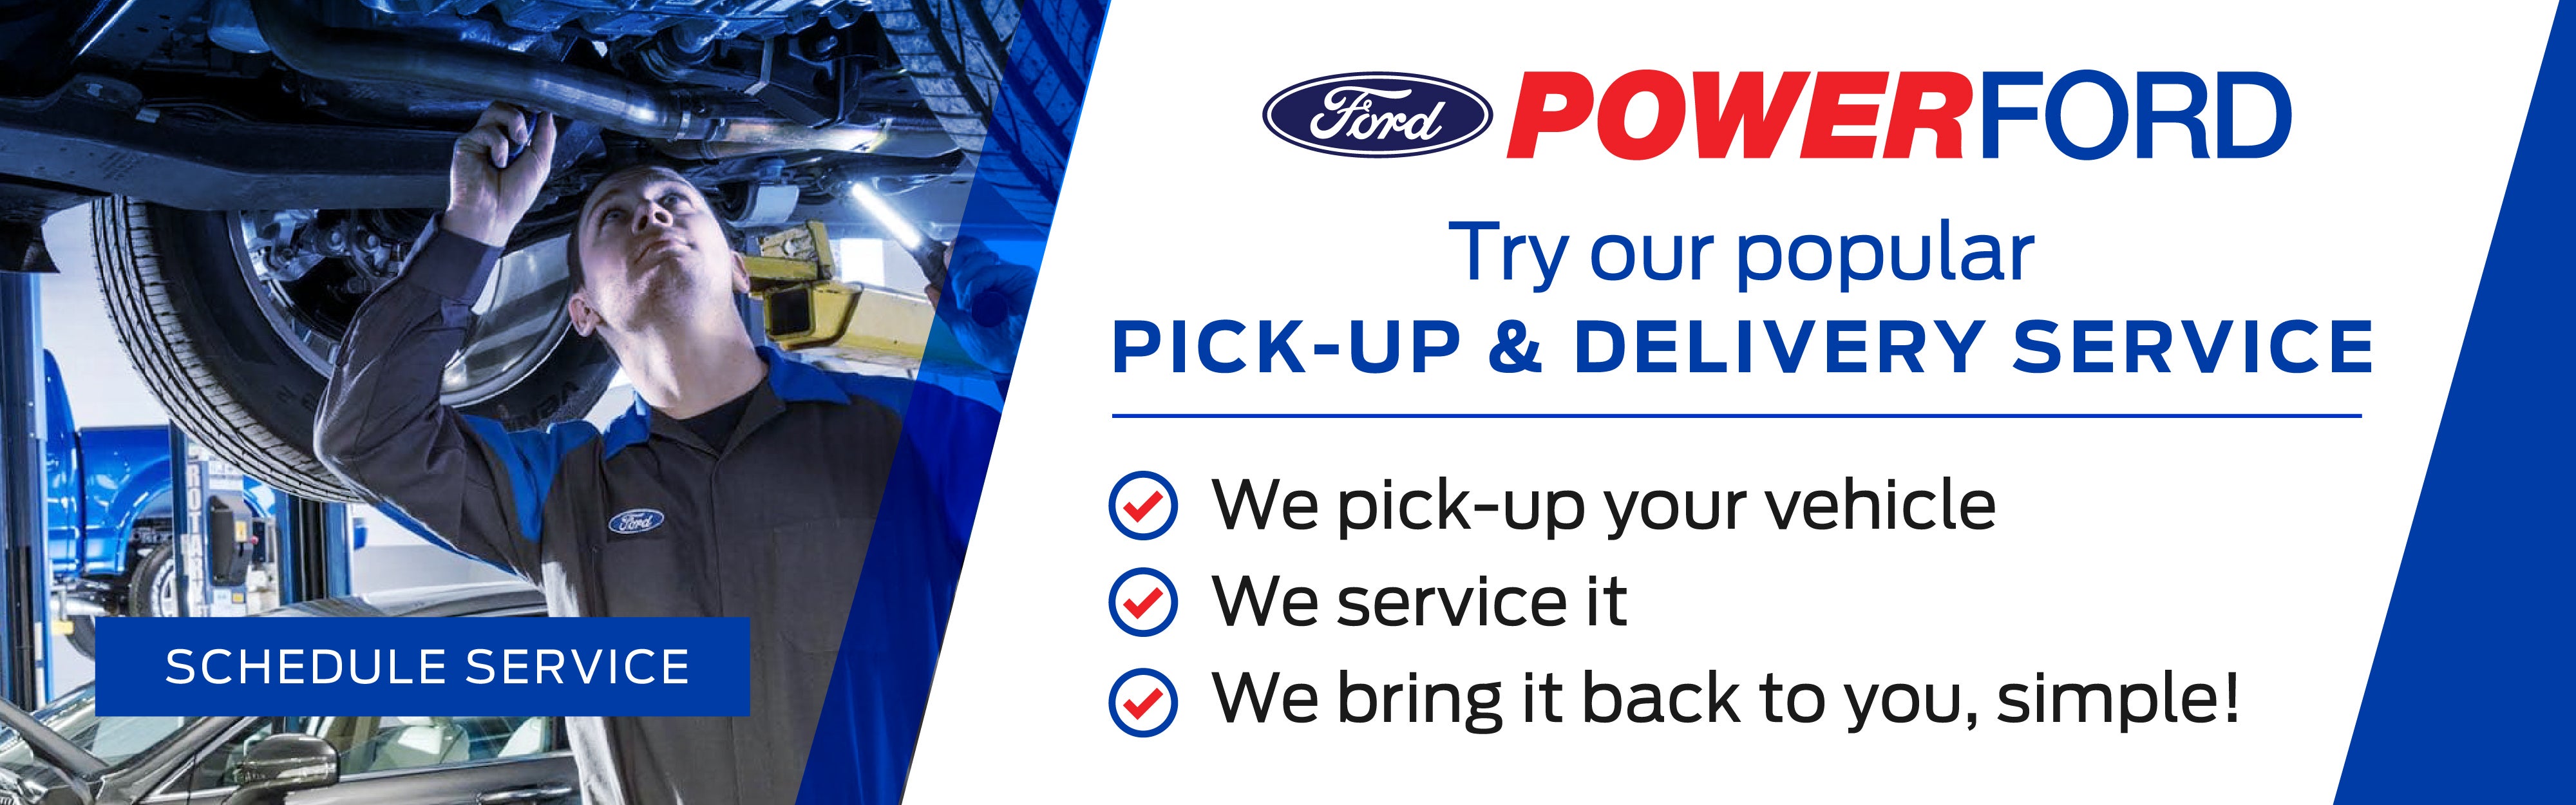 Pick up & Delivery